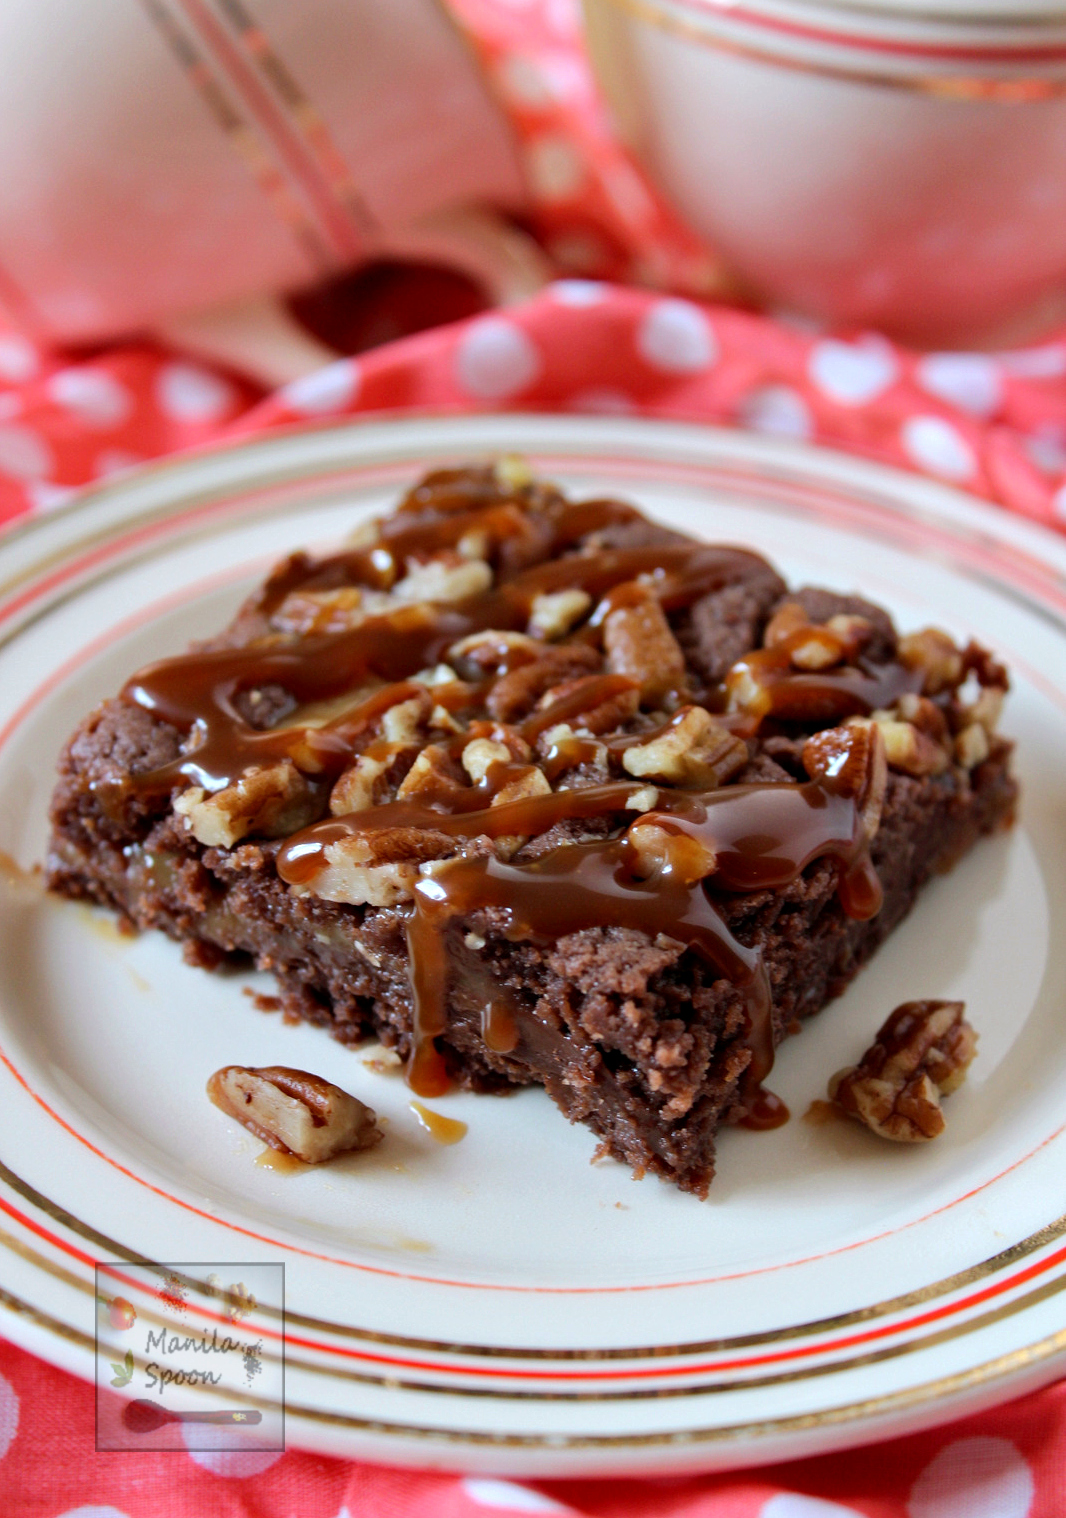 Fudgy, luscious and full of chocolate and caramel deliciousness, these bars are the perfect sweet treat. So easy to make as you begin with a German chocolate cake mix. YUM!